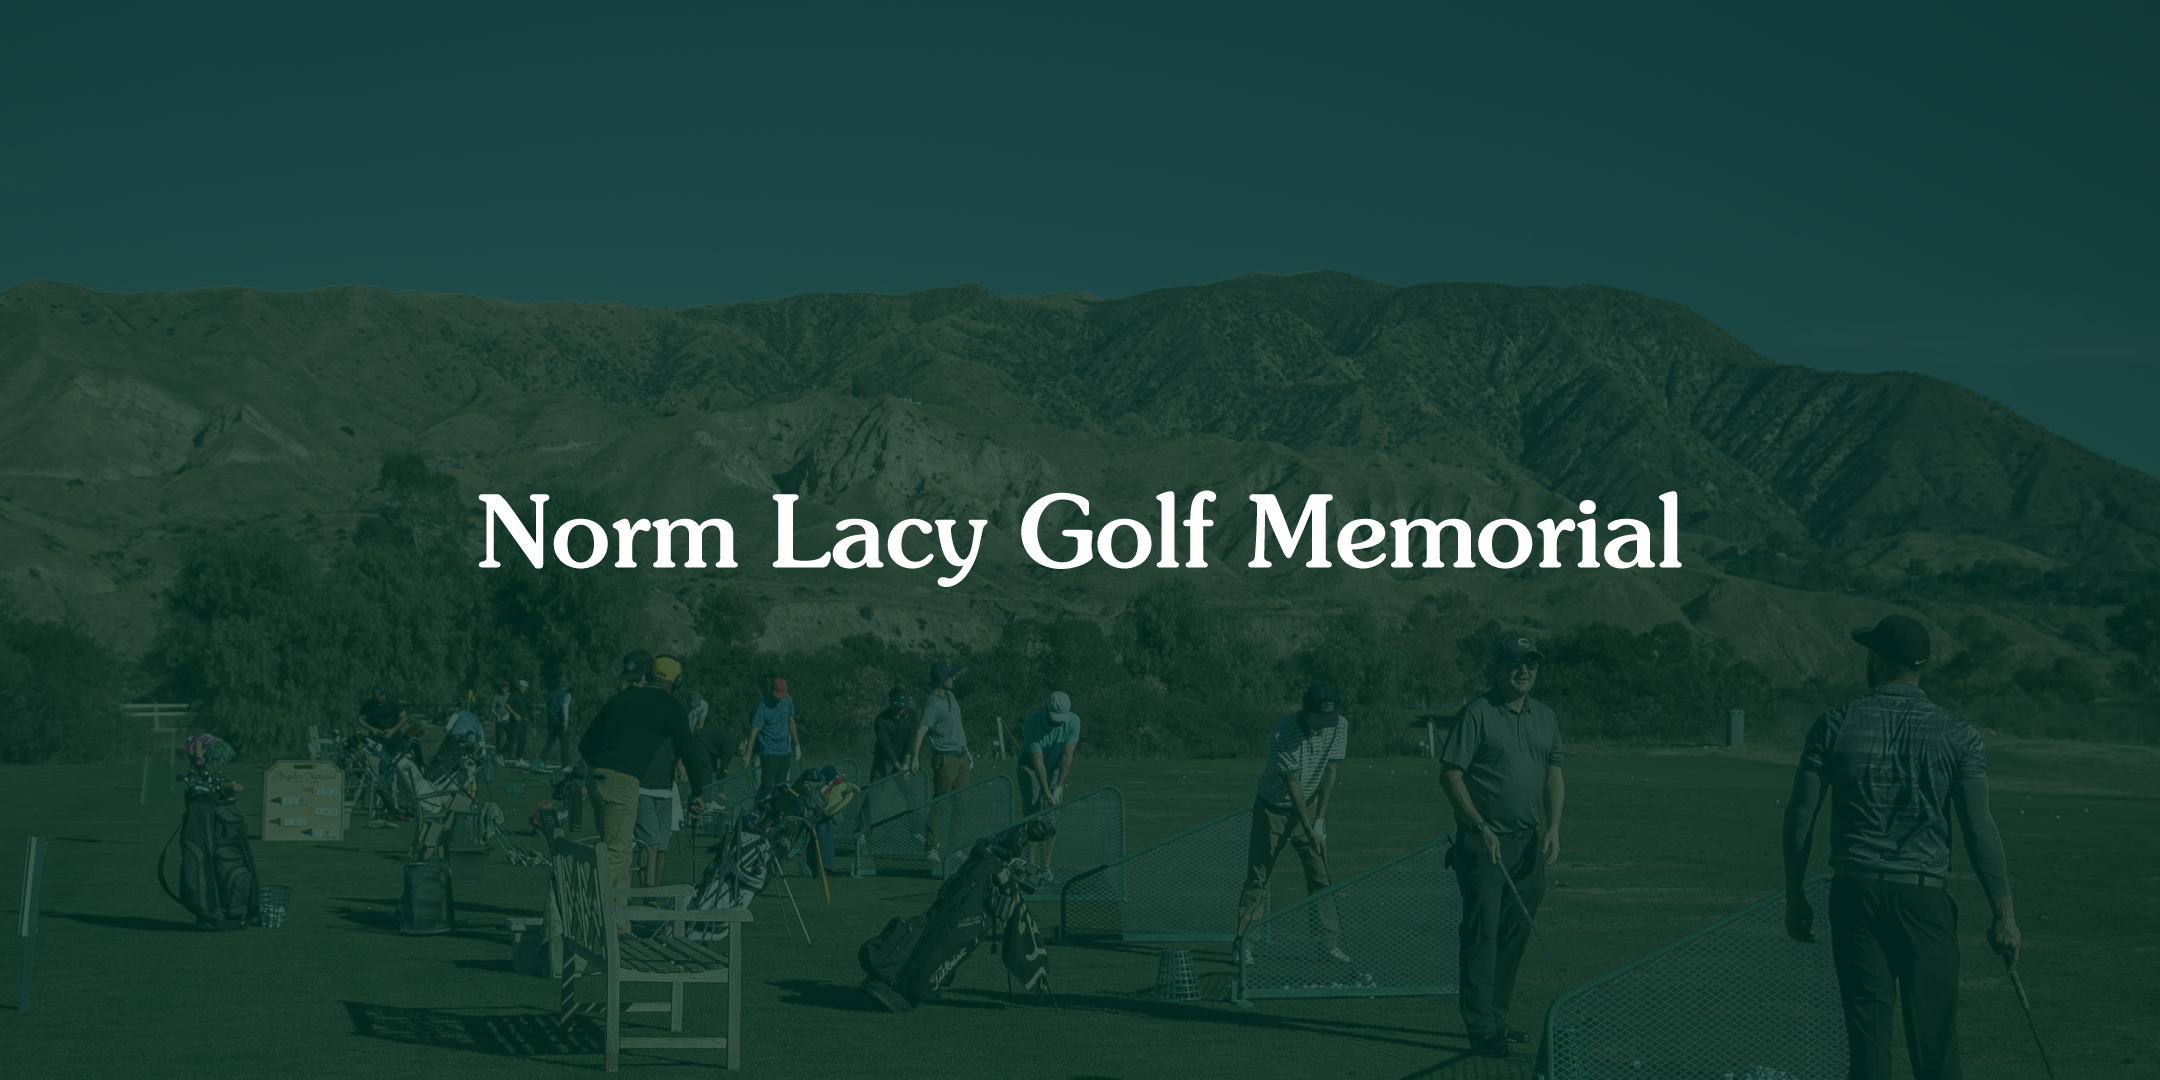 5th Annual NORM LACY Golf Memorial